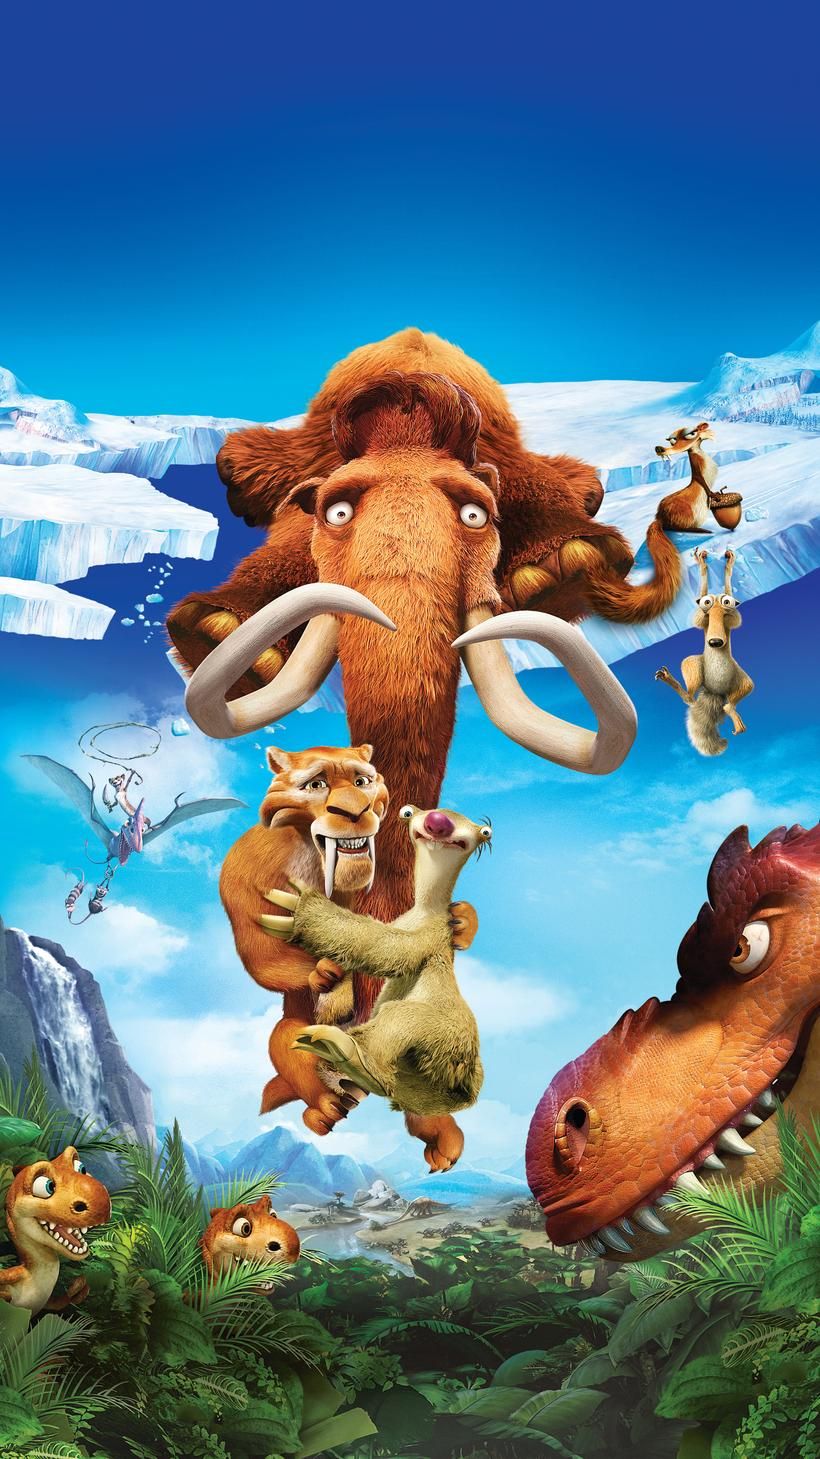 Wallpaper for Ice Age: Dawn of the Dinosaurs (2009). Disney wallpaper, Ice age, Phone wallpaper